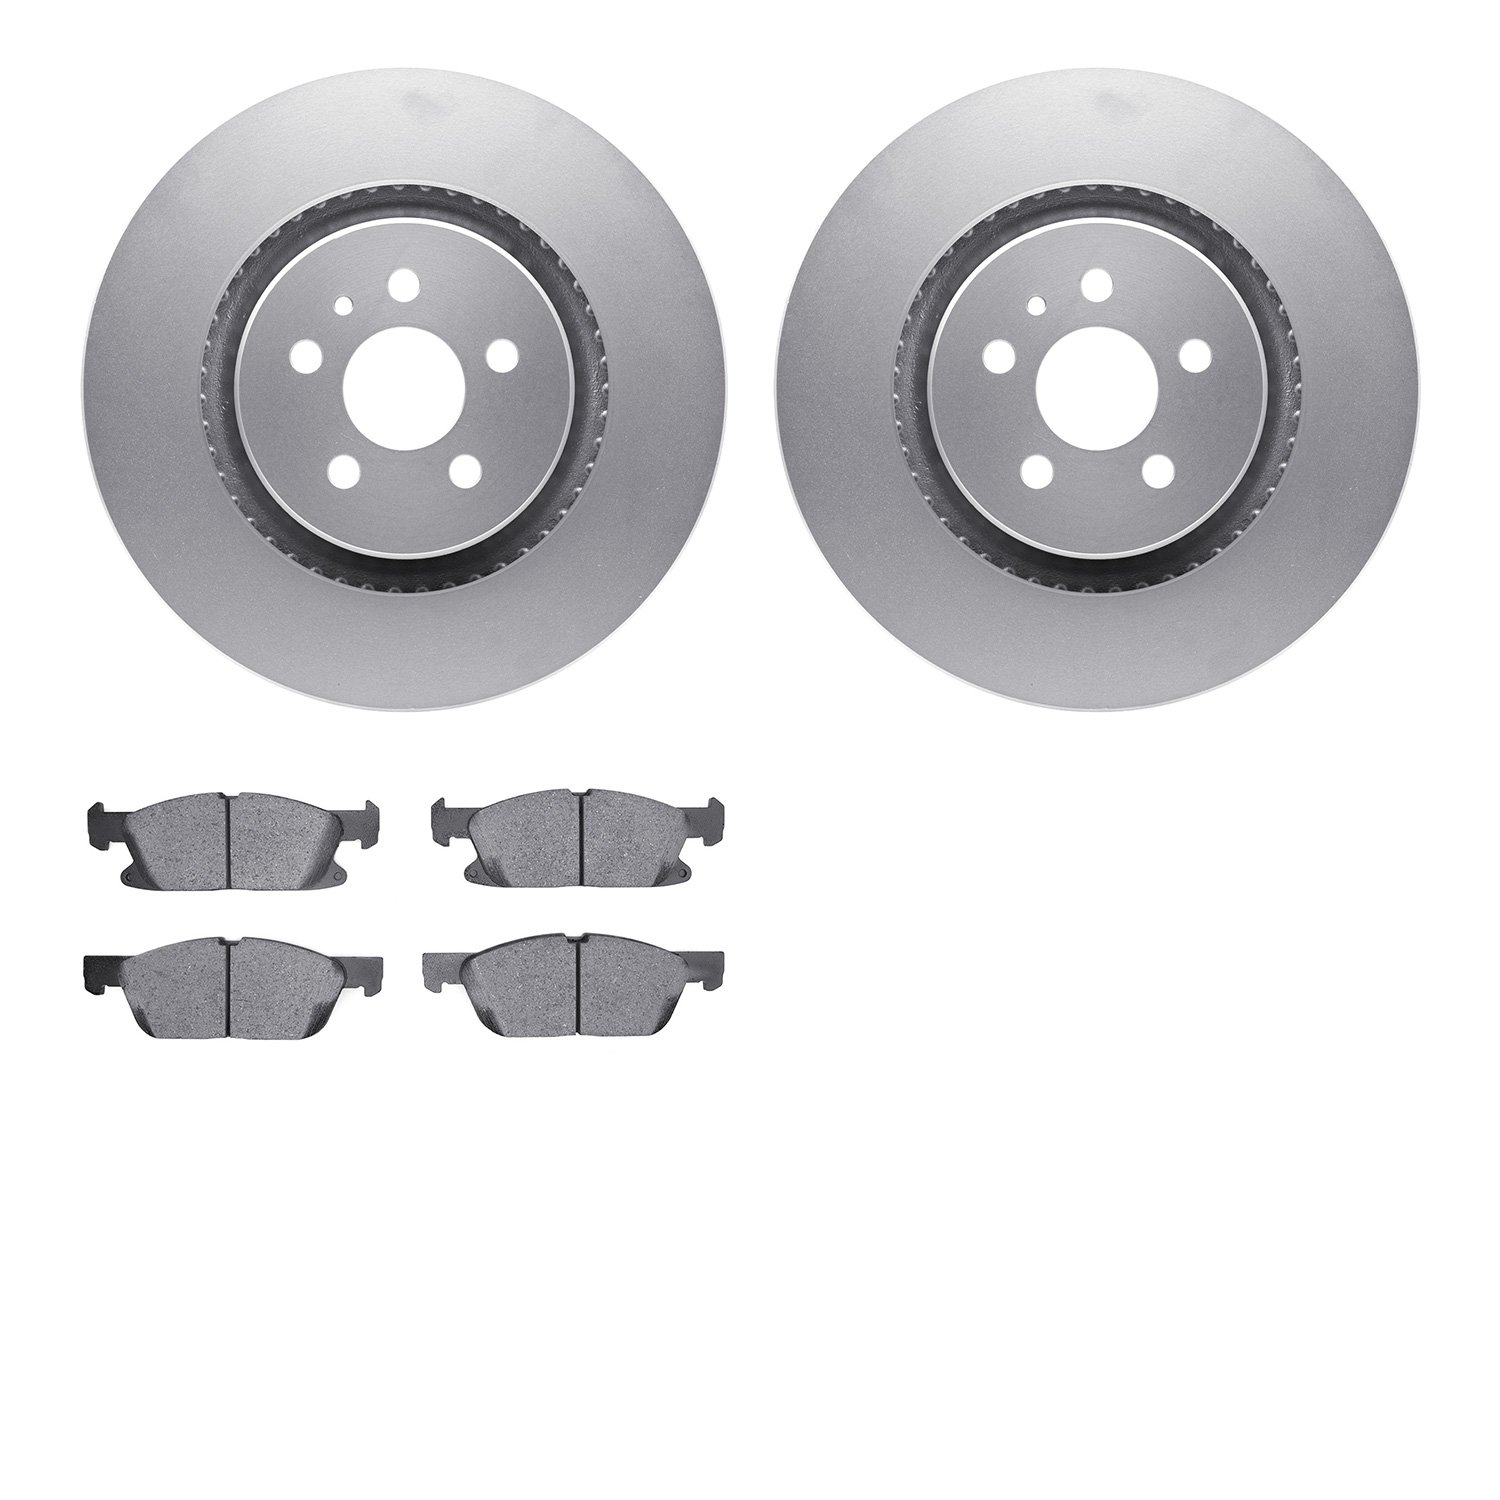 4502-55017 Geospec Brake Rotors w/5000 Advanced Brake Pads Kit, Fits Select Ford/Lincoln/Mercury/Mazda, Position: Front